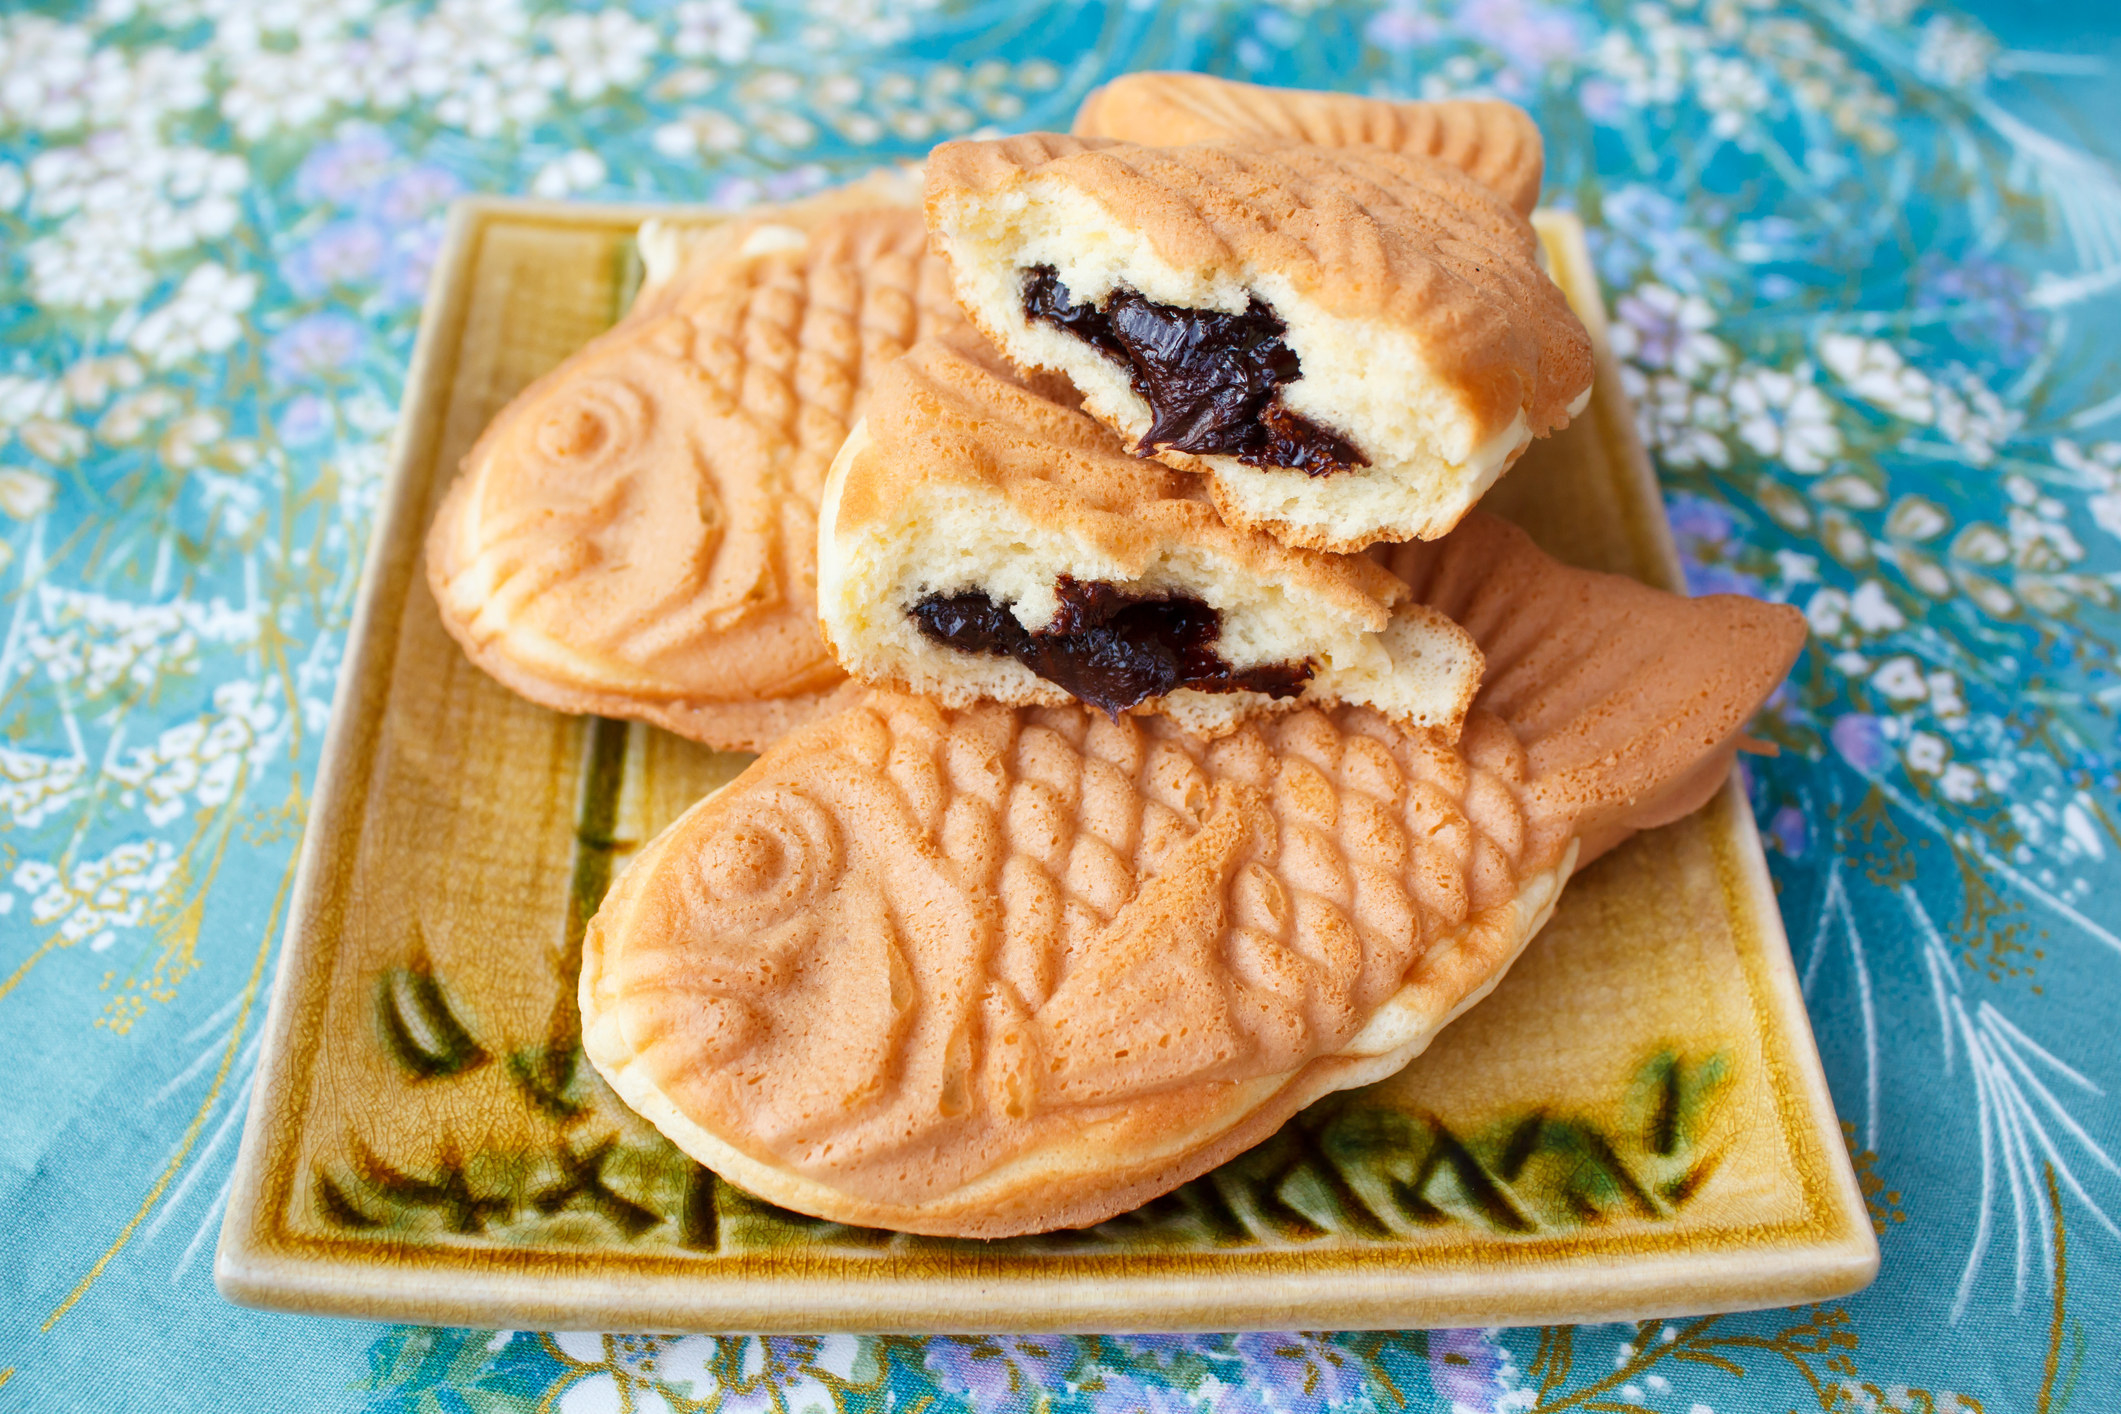 Fish-shaped pastries filled with sweet red bean paste